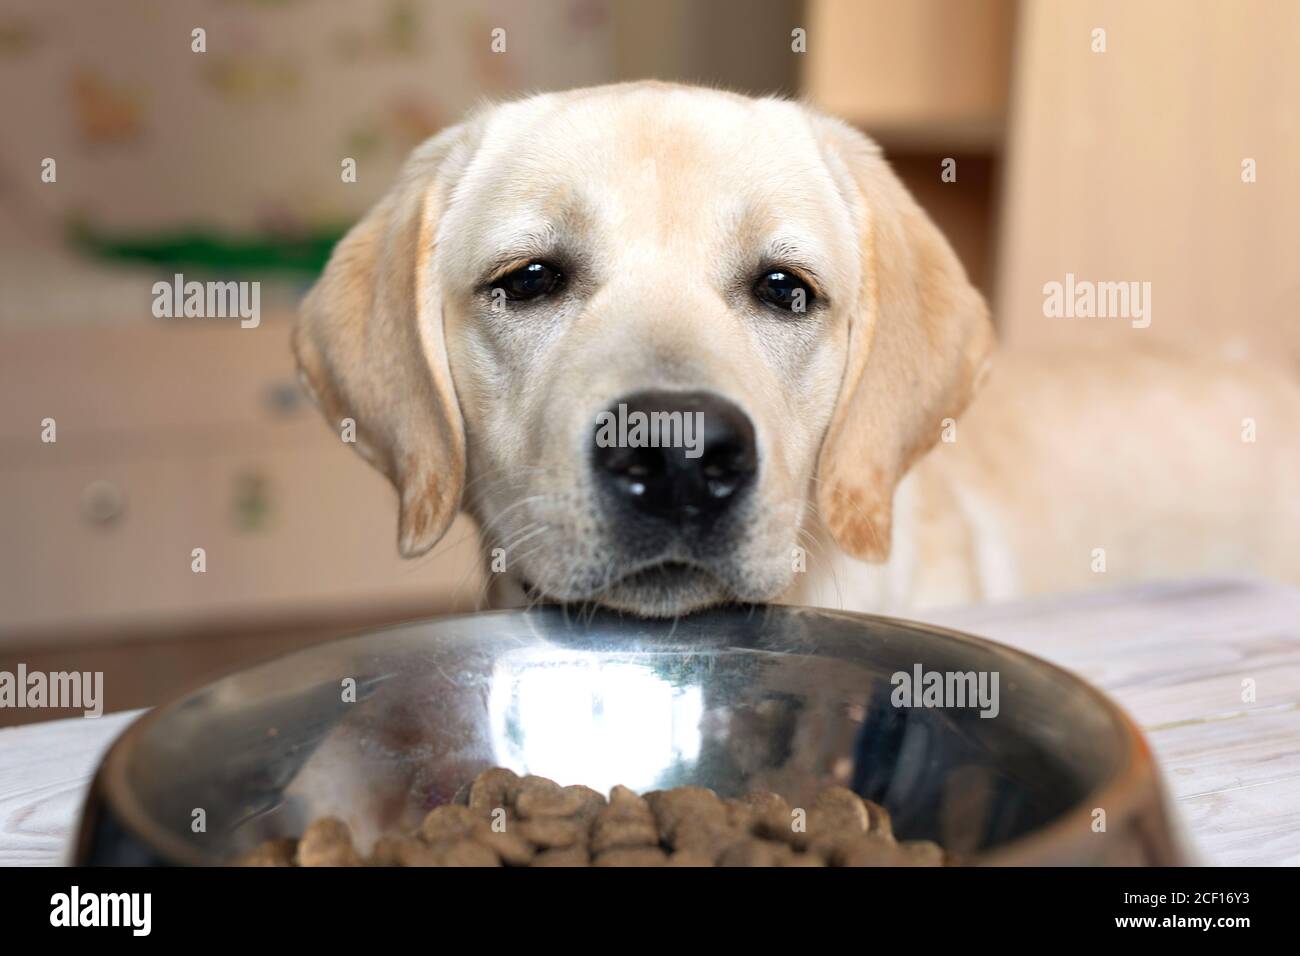 Labrador looks into bowl standing on table, asks for food. begging puppy Stock Photo